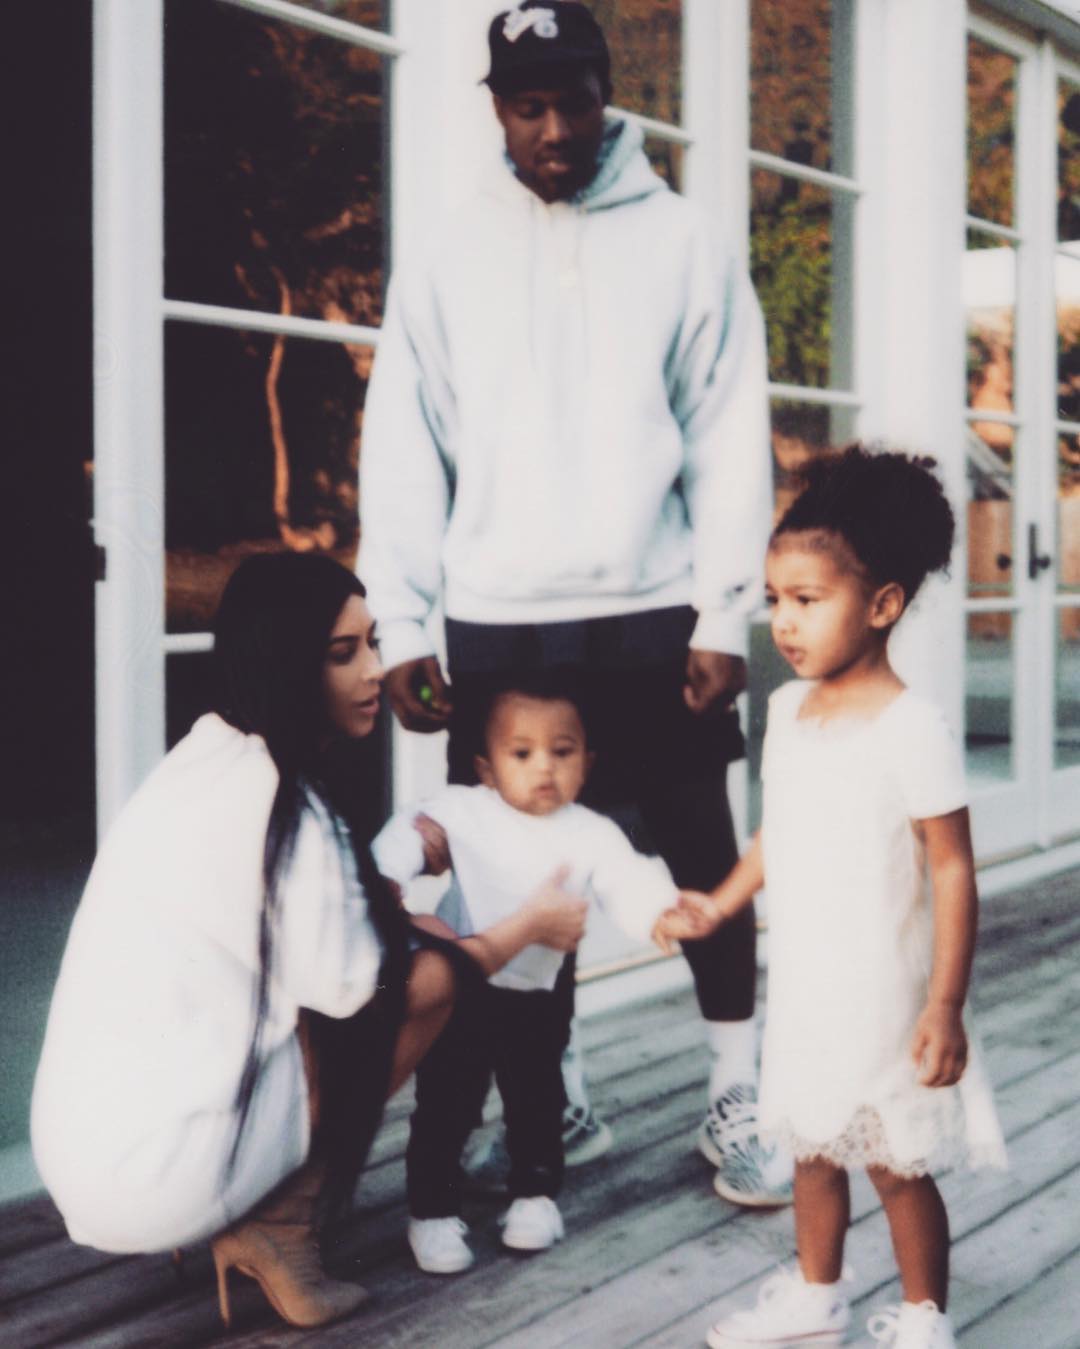 Kim Kardashian Returns To Social Media With This Super Cute Family Photo And Video